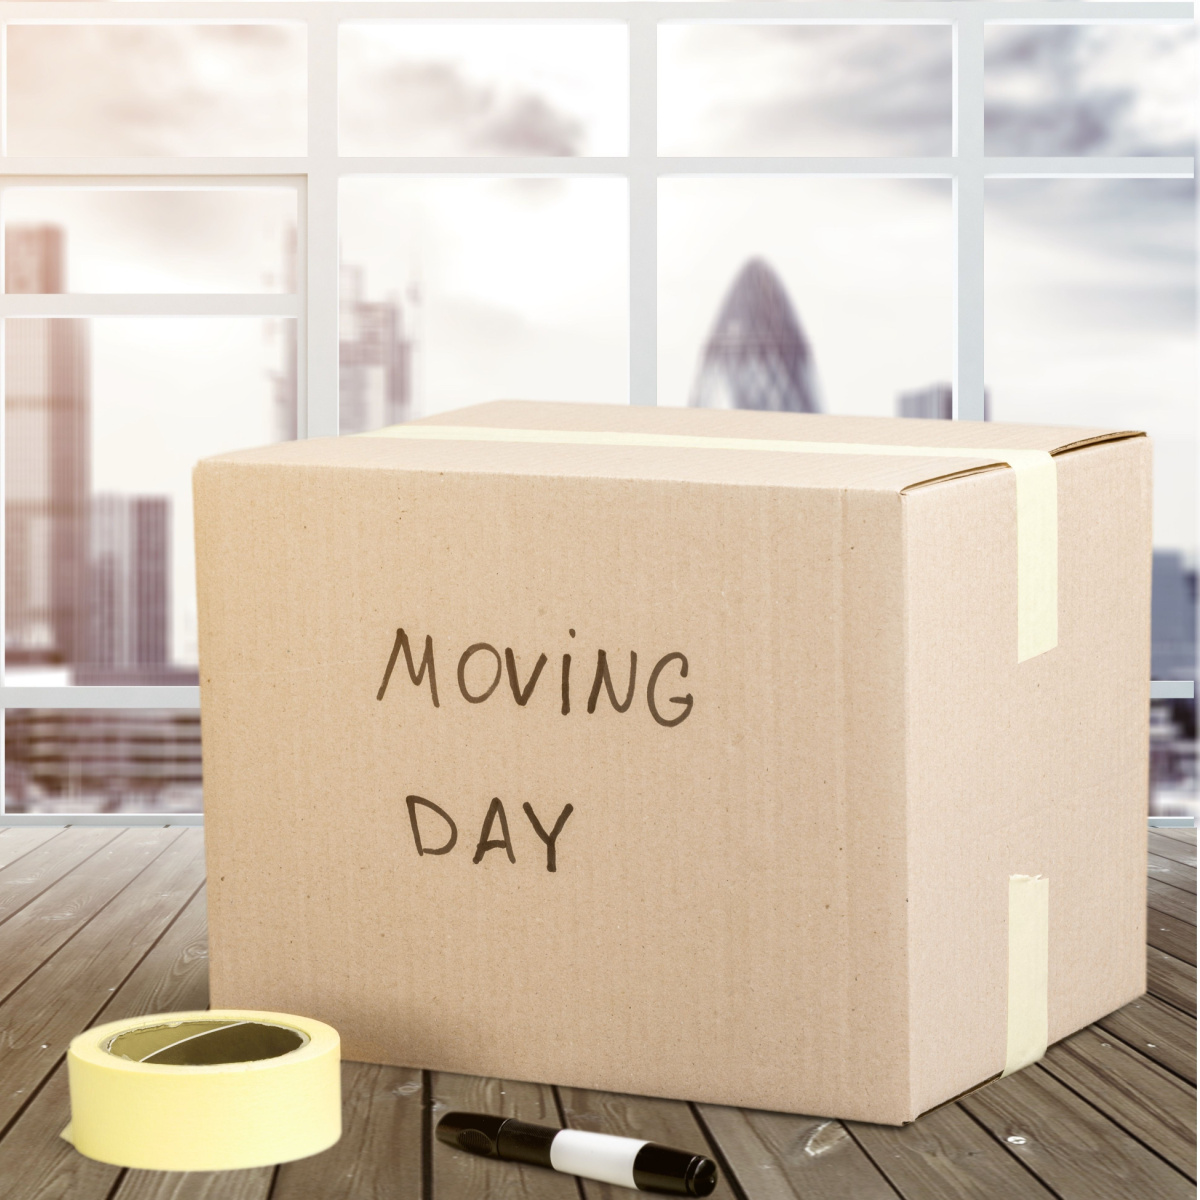 Relieve your relocation complications by working with a cash house buyer